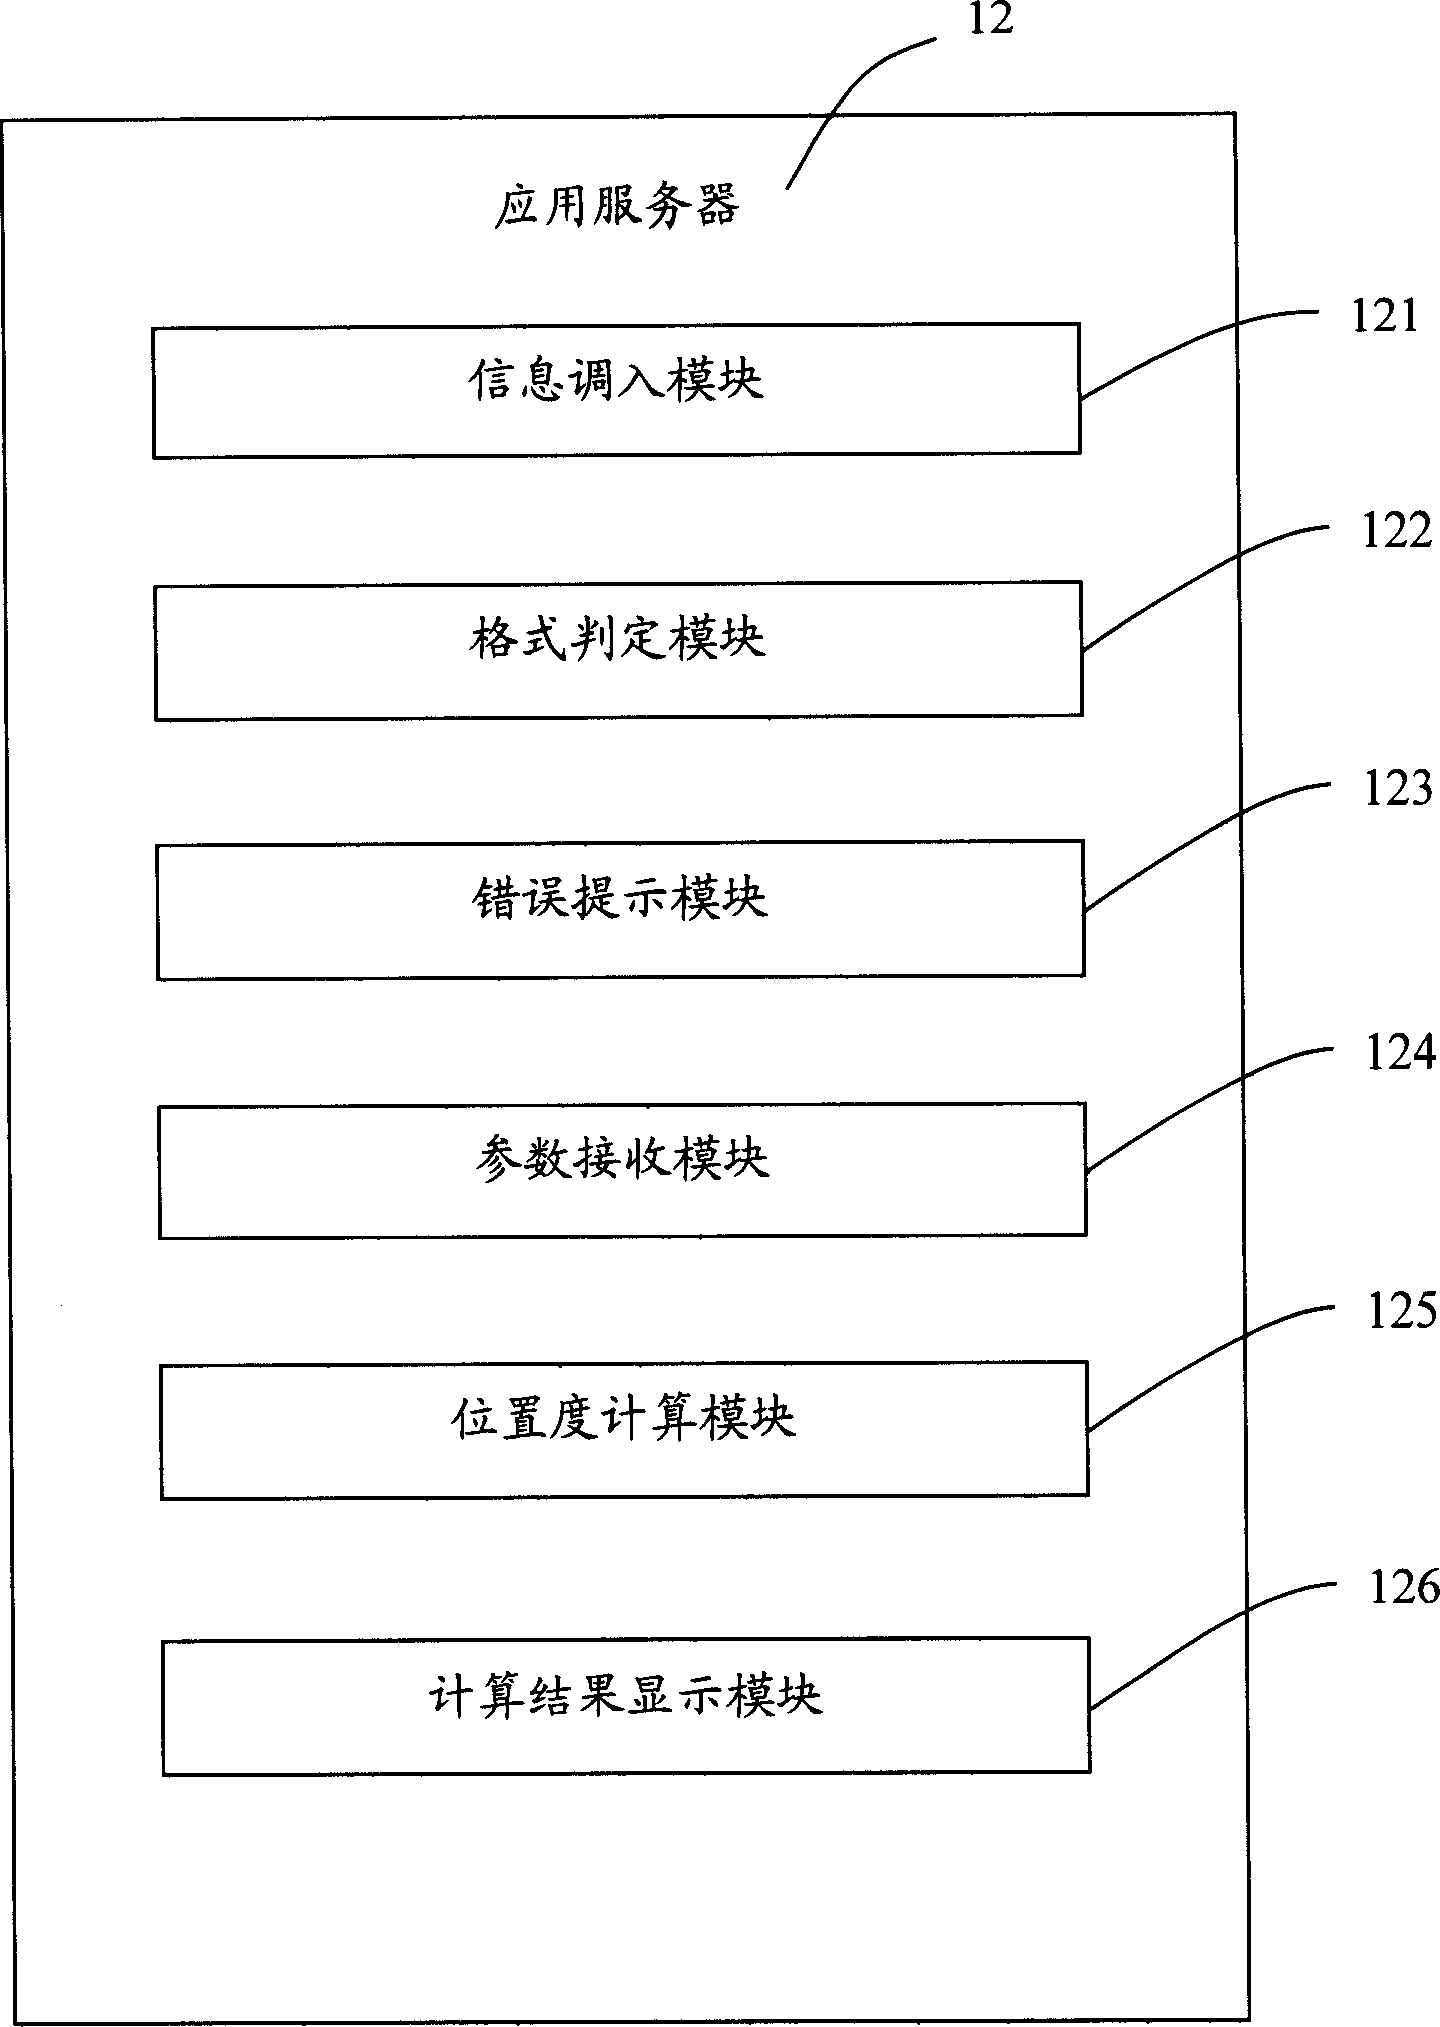 Complex position degree computing system and method